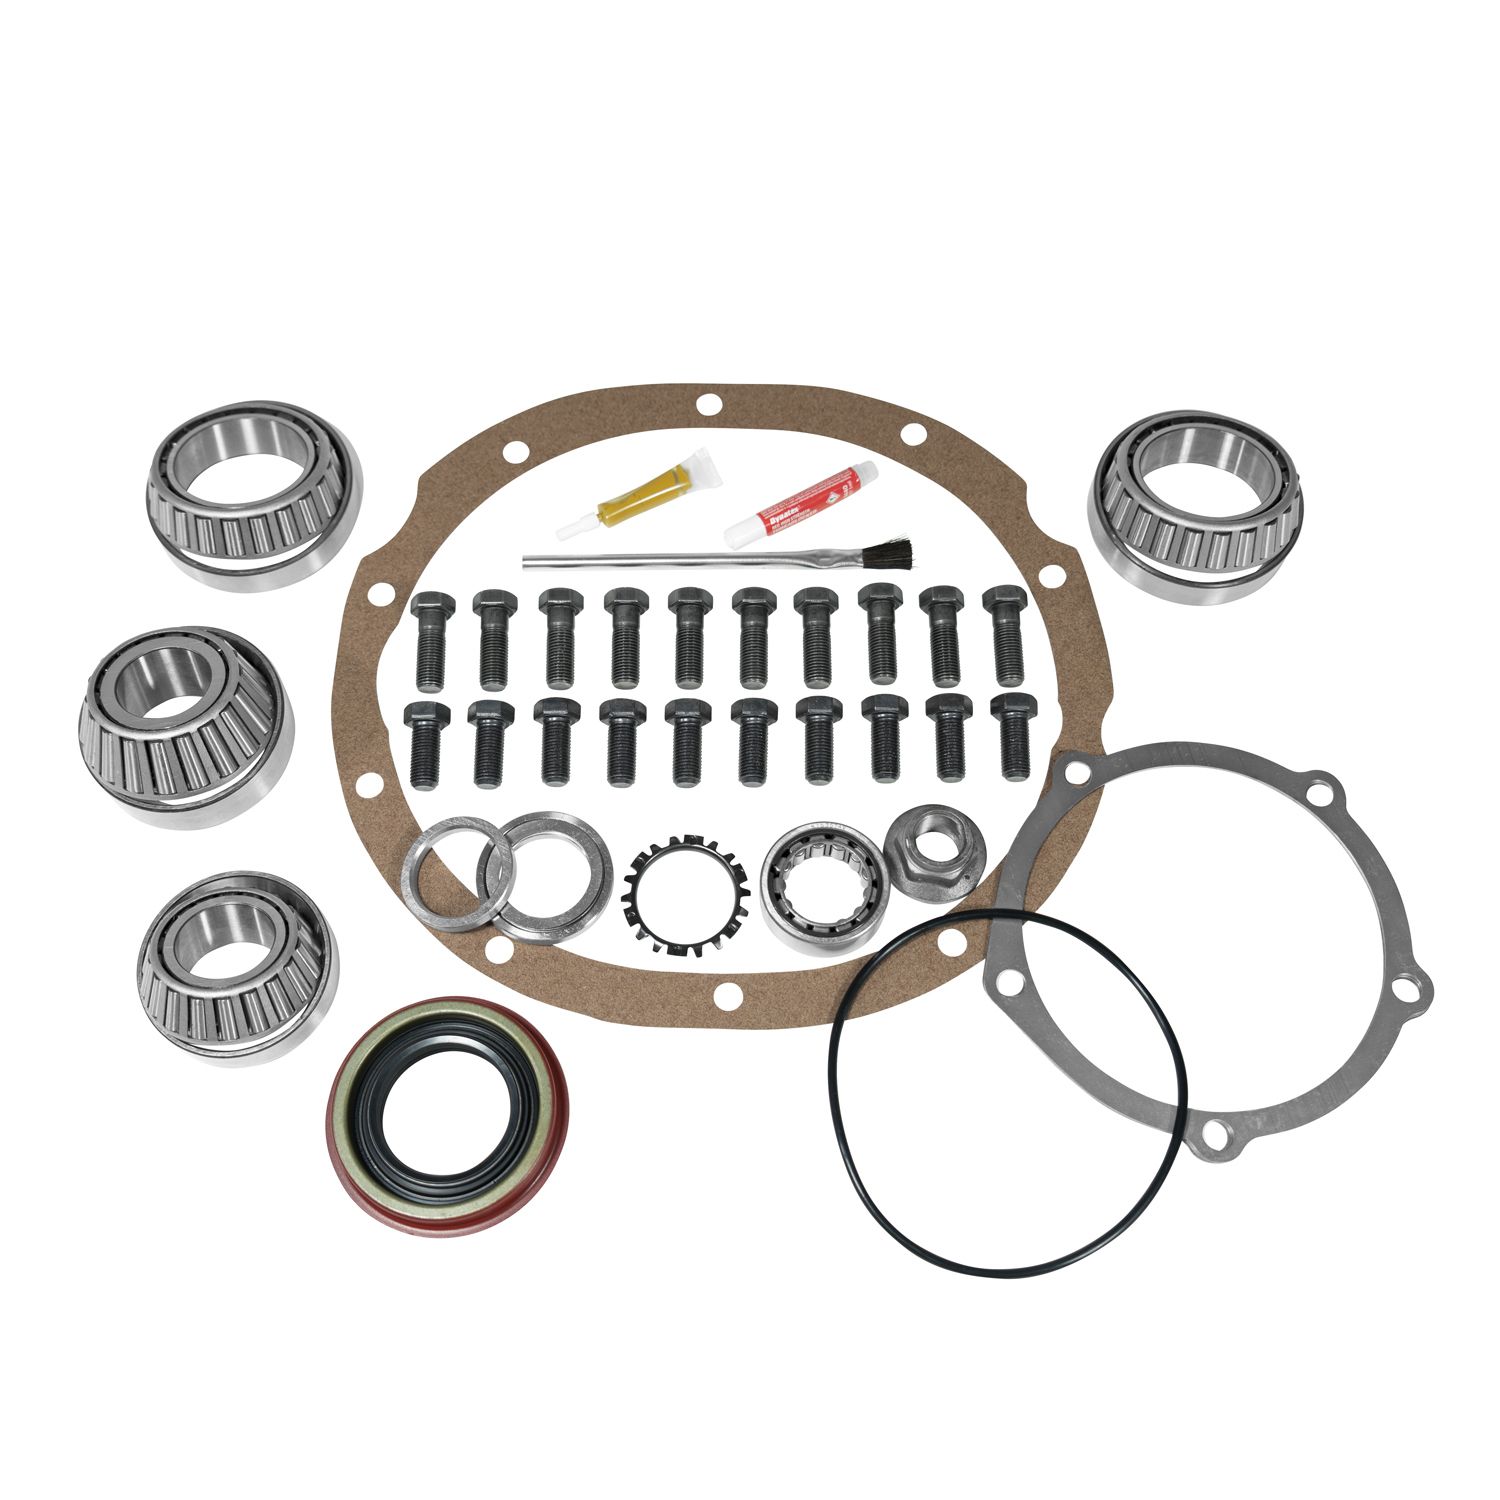 Yukon Master Overhaul kit for Ford 9" LM104911 differential, 28 spline pinion 